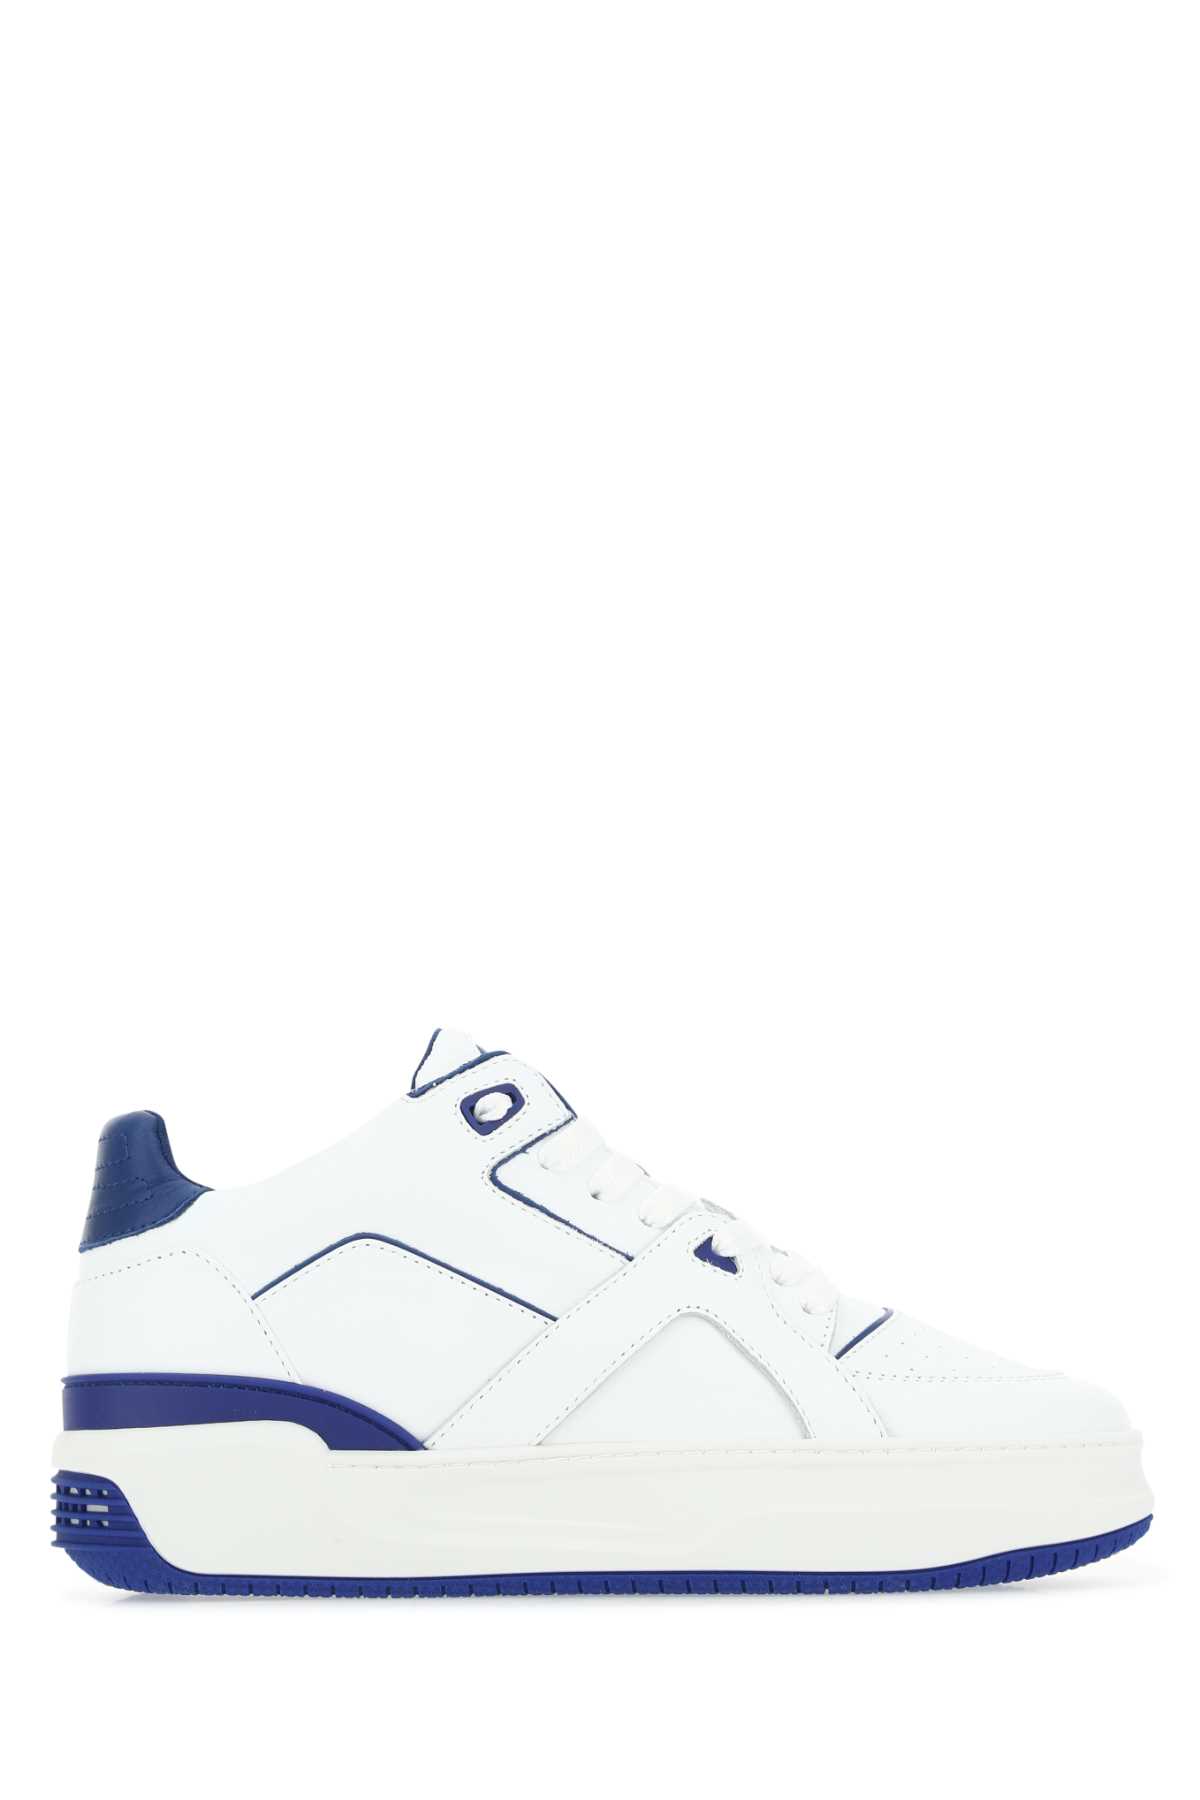 Two-tone Leather Courtside Lo Jd3 Sneakers